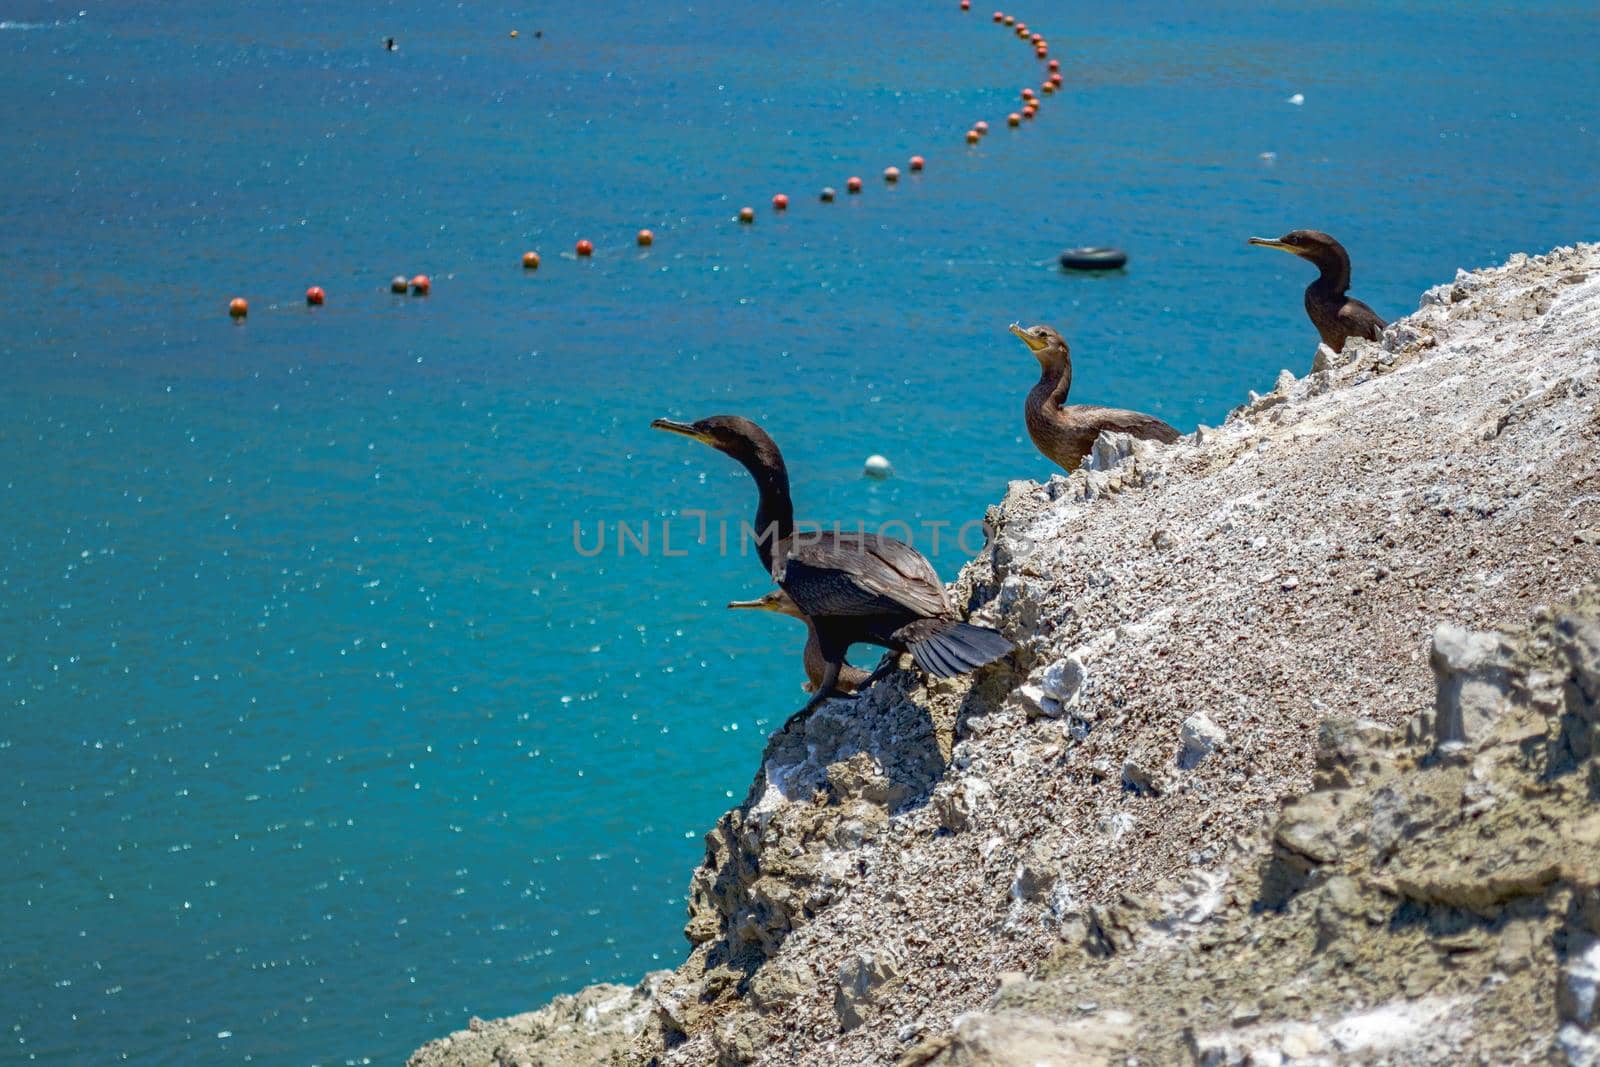 Black cormorants (Phalacrocorax carbo) perched on the rocks by the sea of Antofagasta, Chile by hernan_hyper